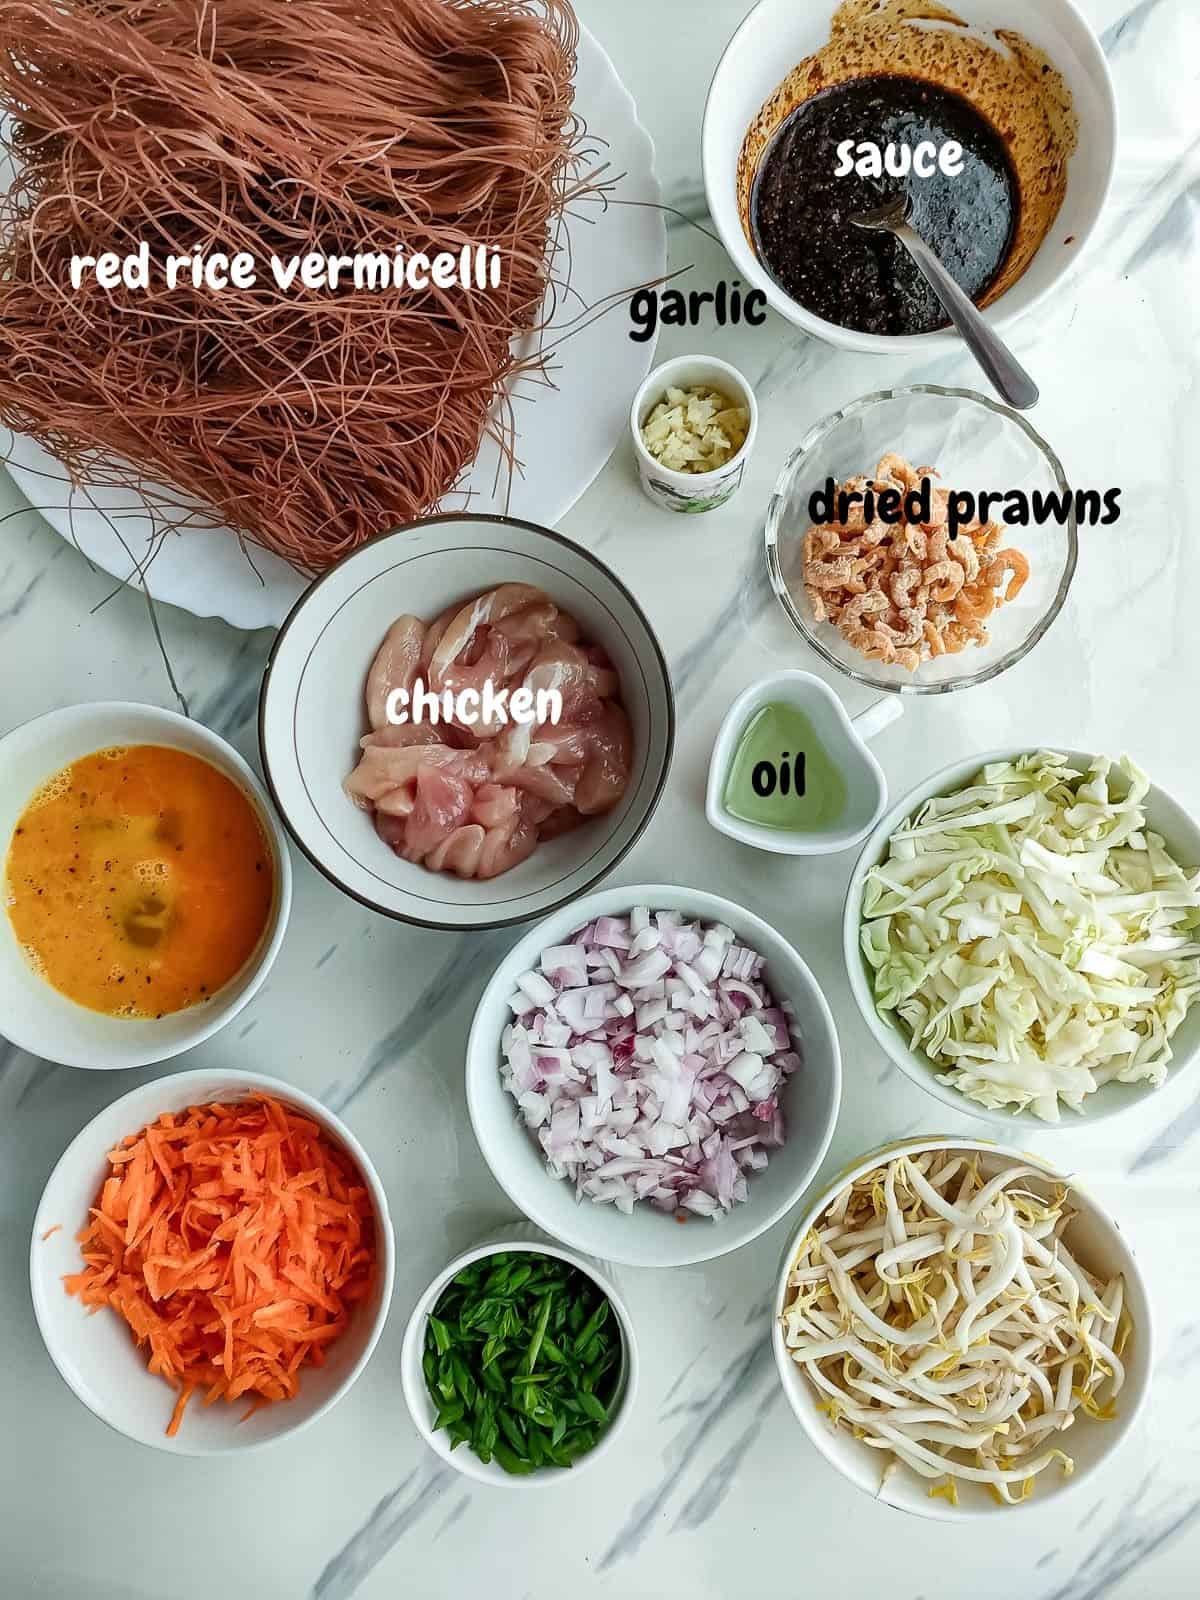 Labelled ingredients for Singapore street noodles recipe.